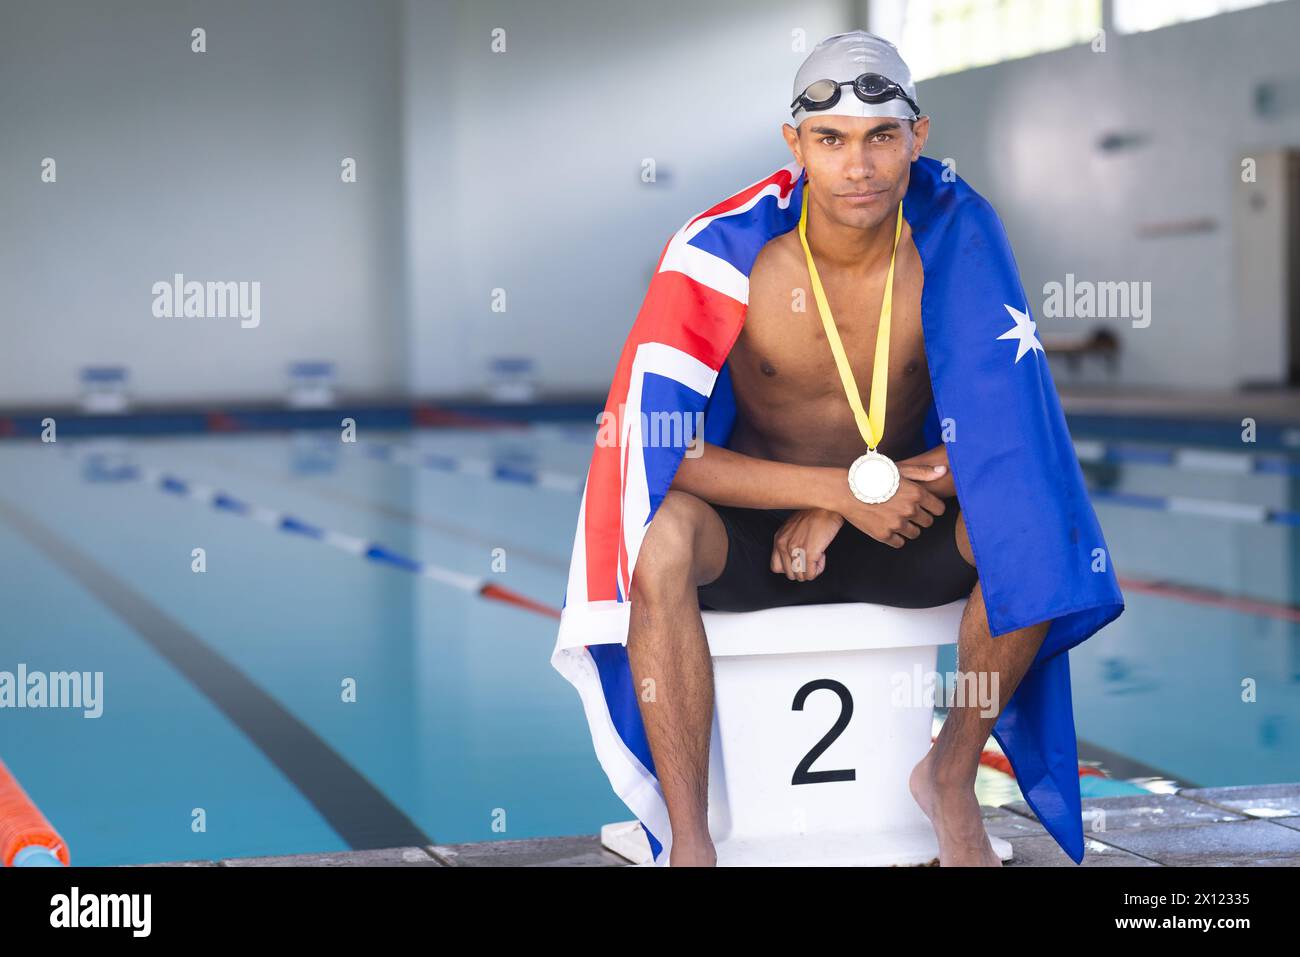 Male athlete swimmer wrapped in Australian flag sitting on podium with gold medal Stock Photo